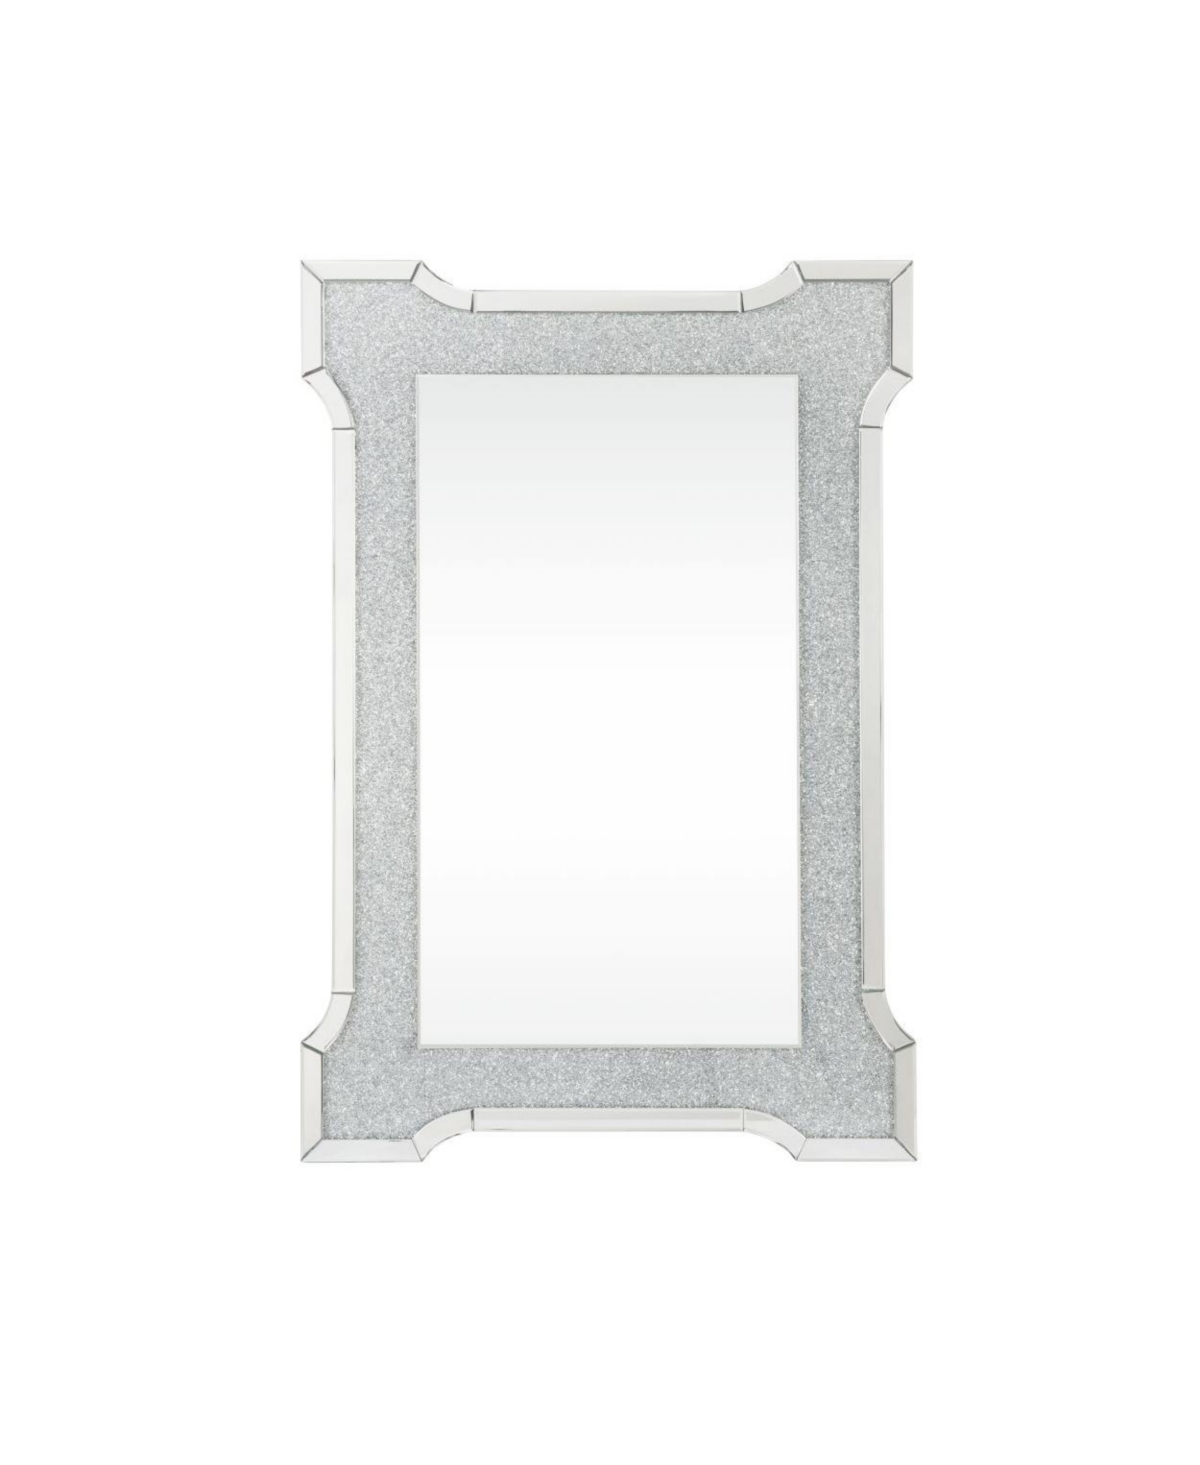 Nowles Wall Decor, Mirrored & Faux Stones - Silver